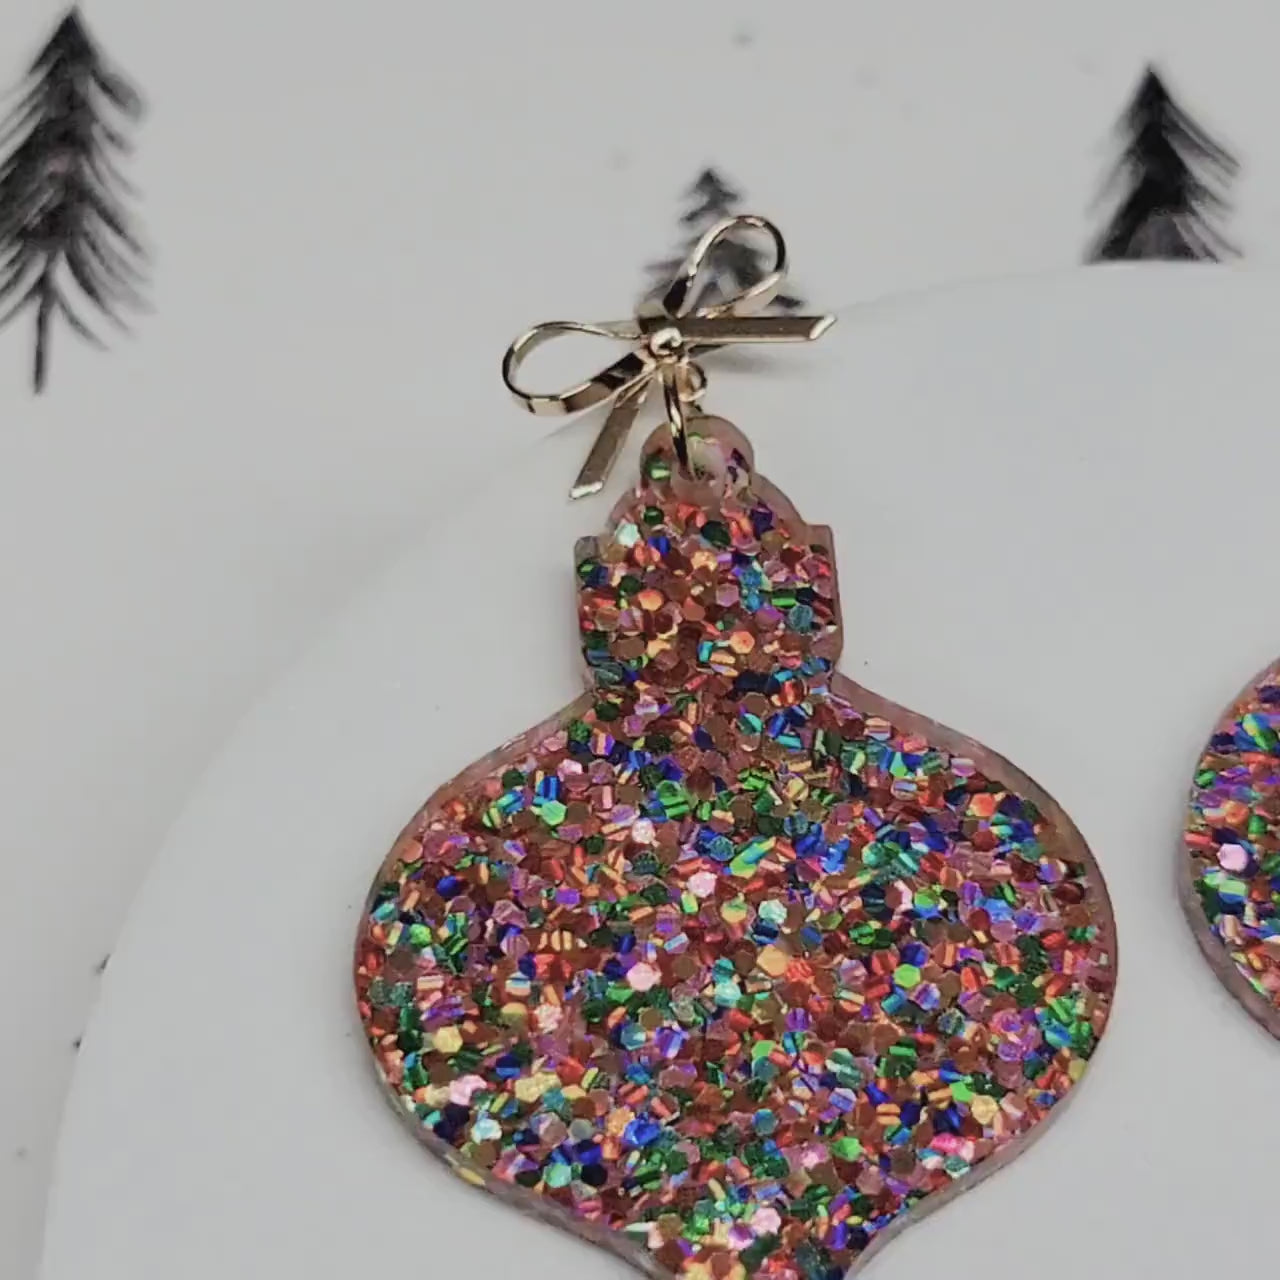 Christmas Ornament Earrings, Holiday Winter Accessories, Statement Acrylic Earrings, Christmas Acrylic Earrings, Glitter Earrings